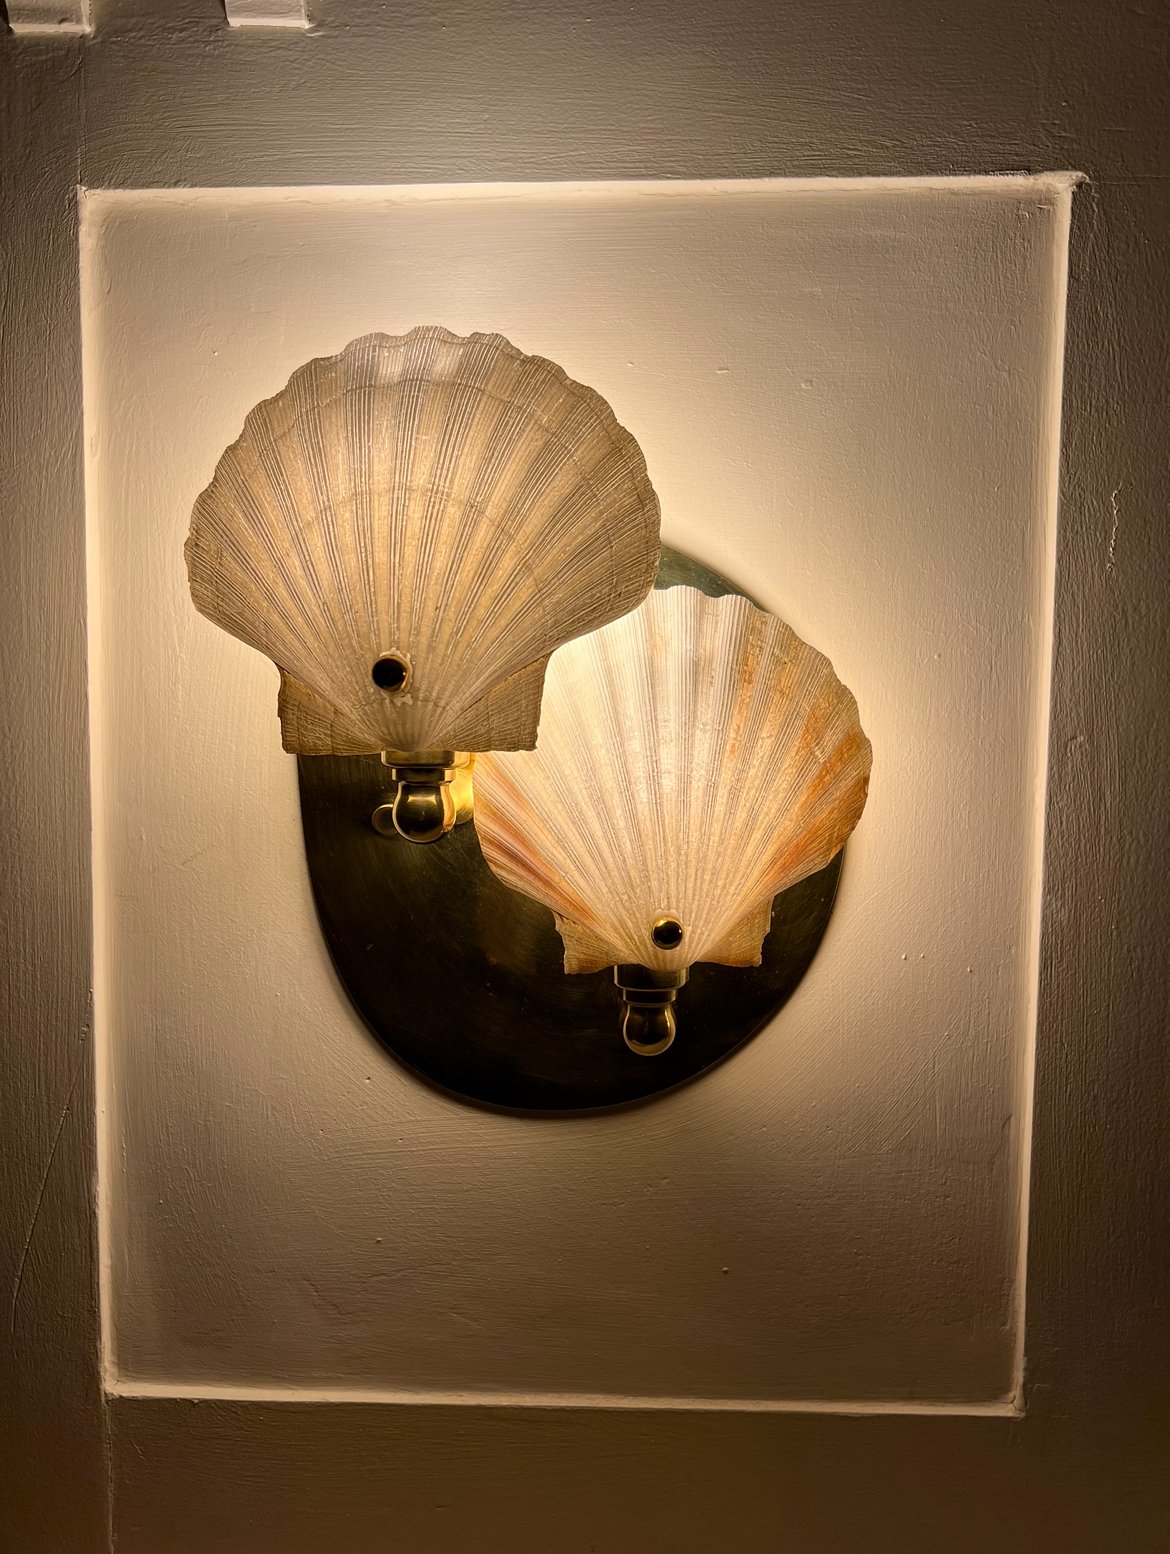 A bespoke wall light in the main hall, one of a pair.